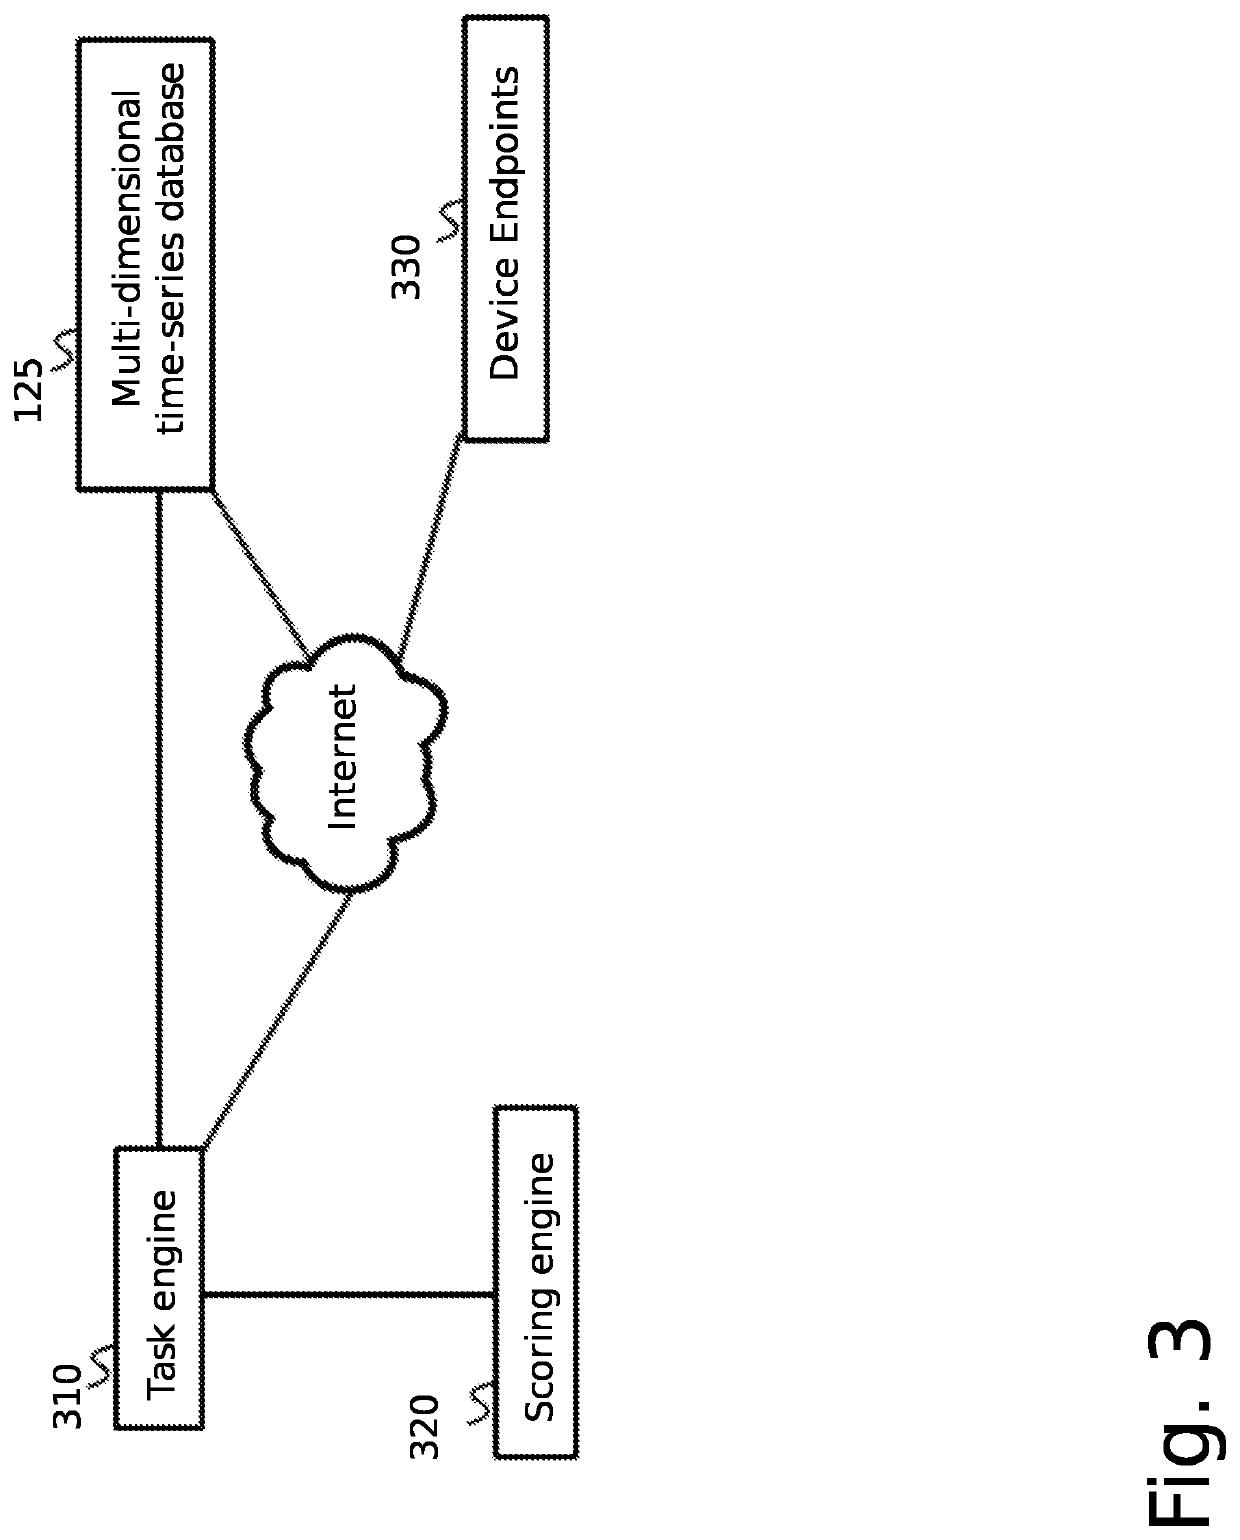 System and methods for automatically assessing and improving a cybersecurity risk score